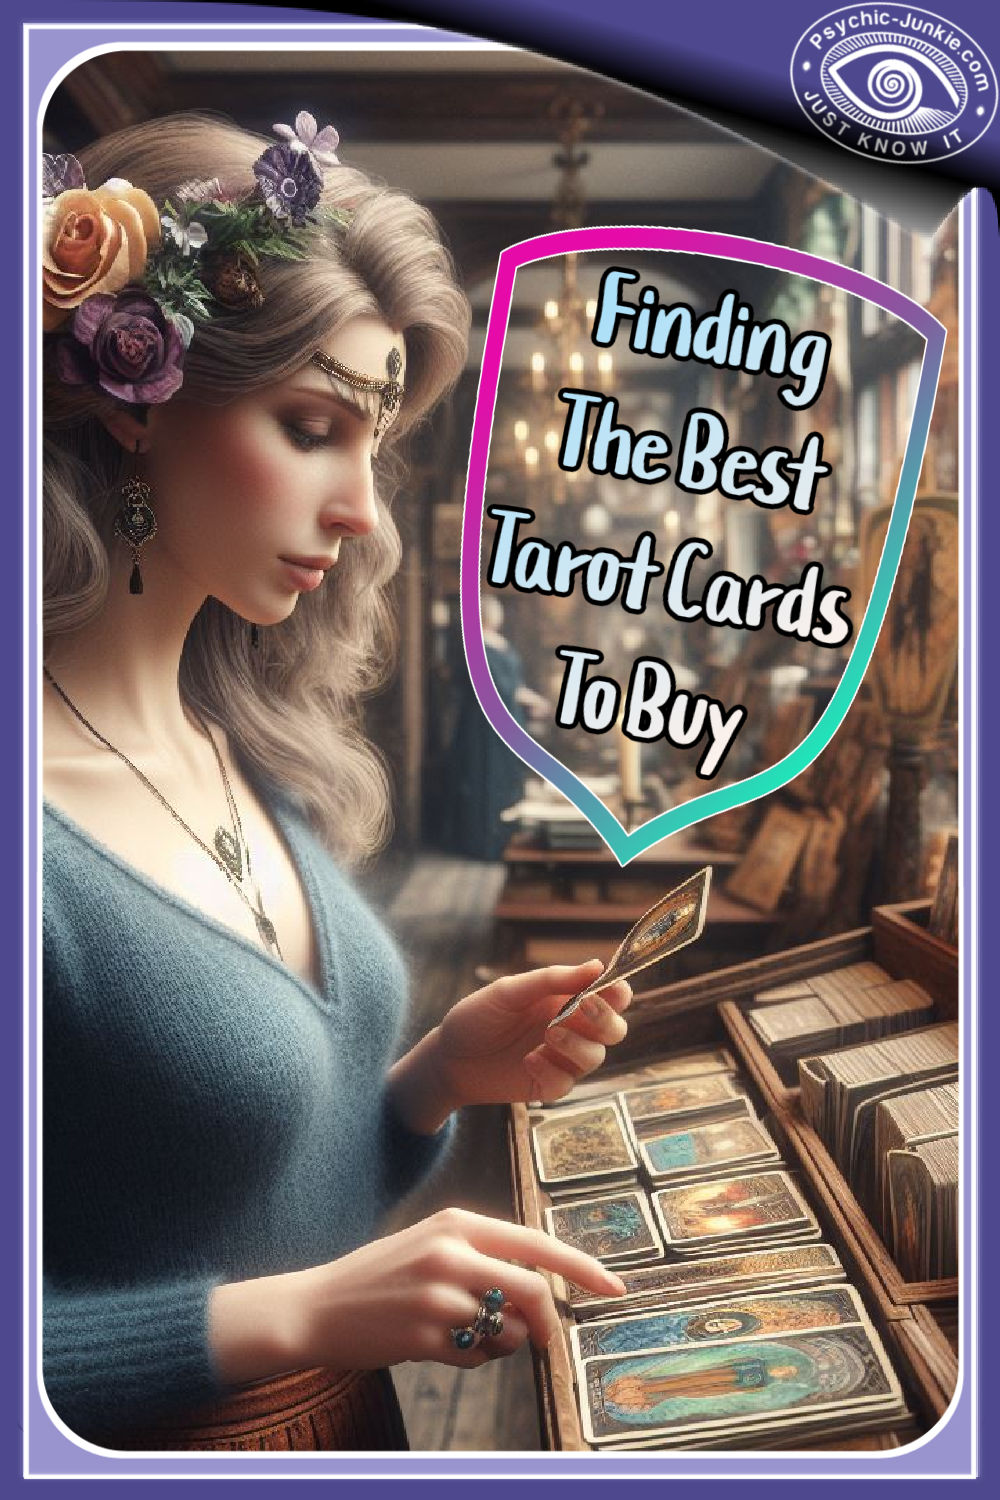 Finding The Best Tarot Cards To Buy